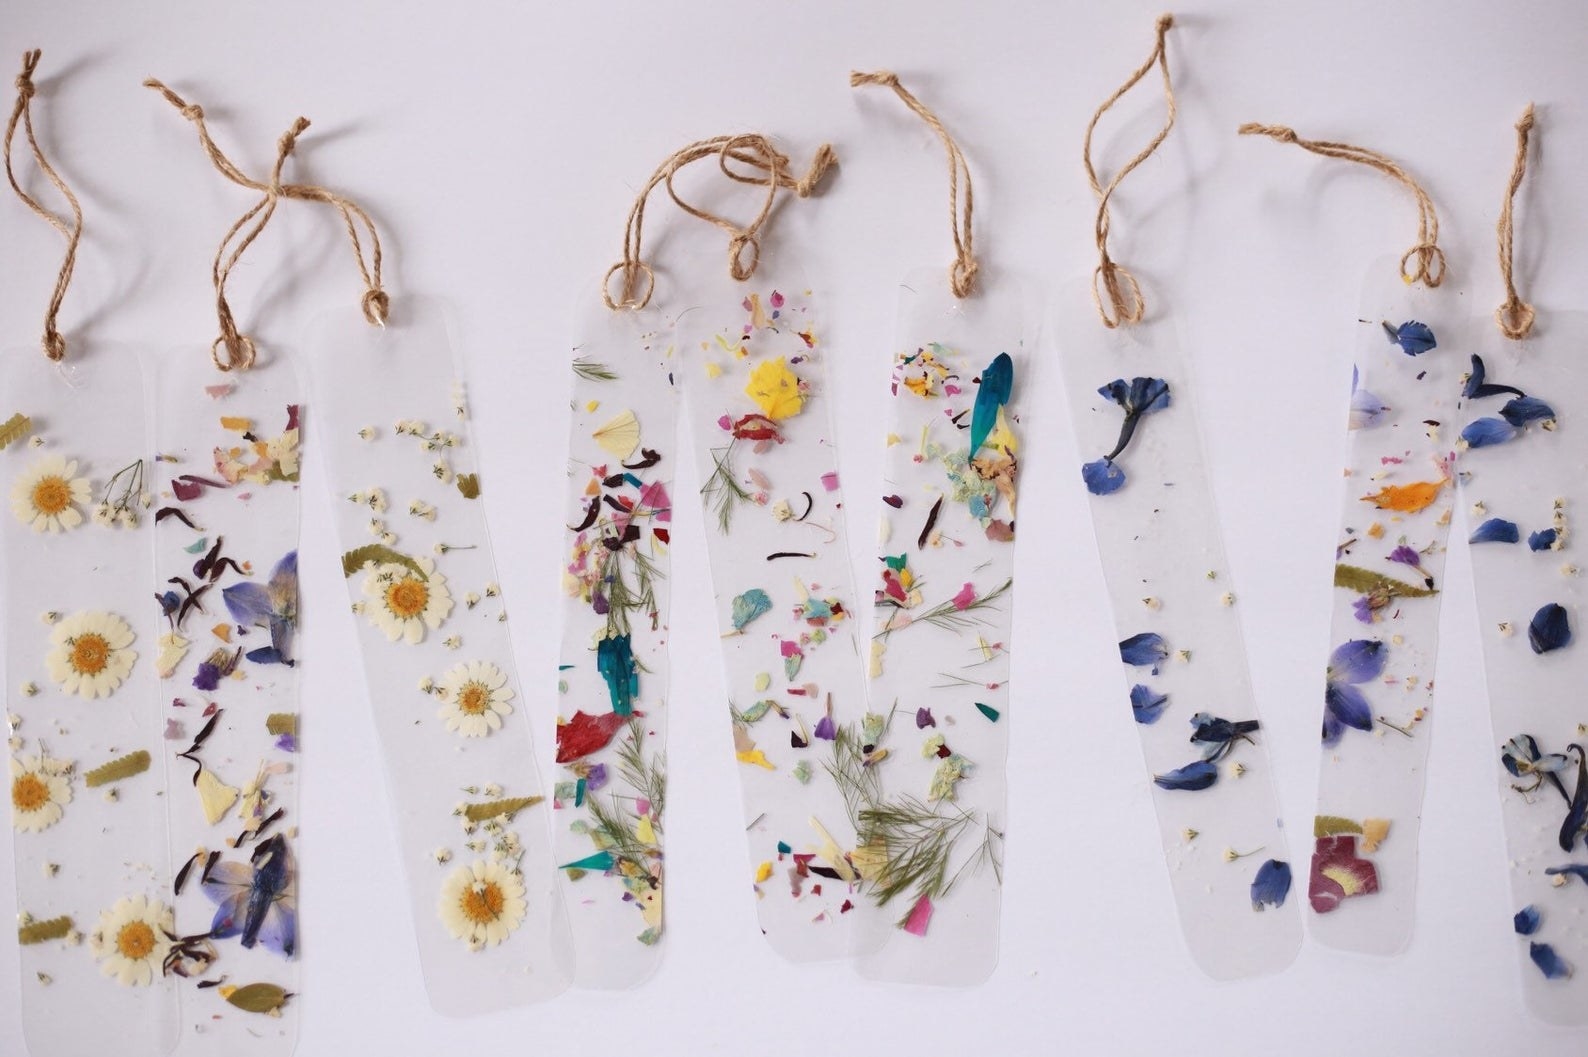 Transparent bookmarks with dried pressed flowers in them 